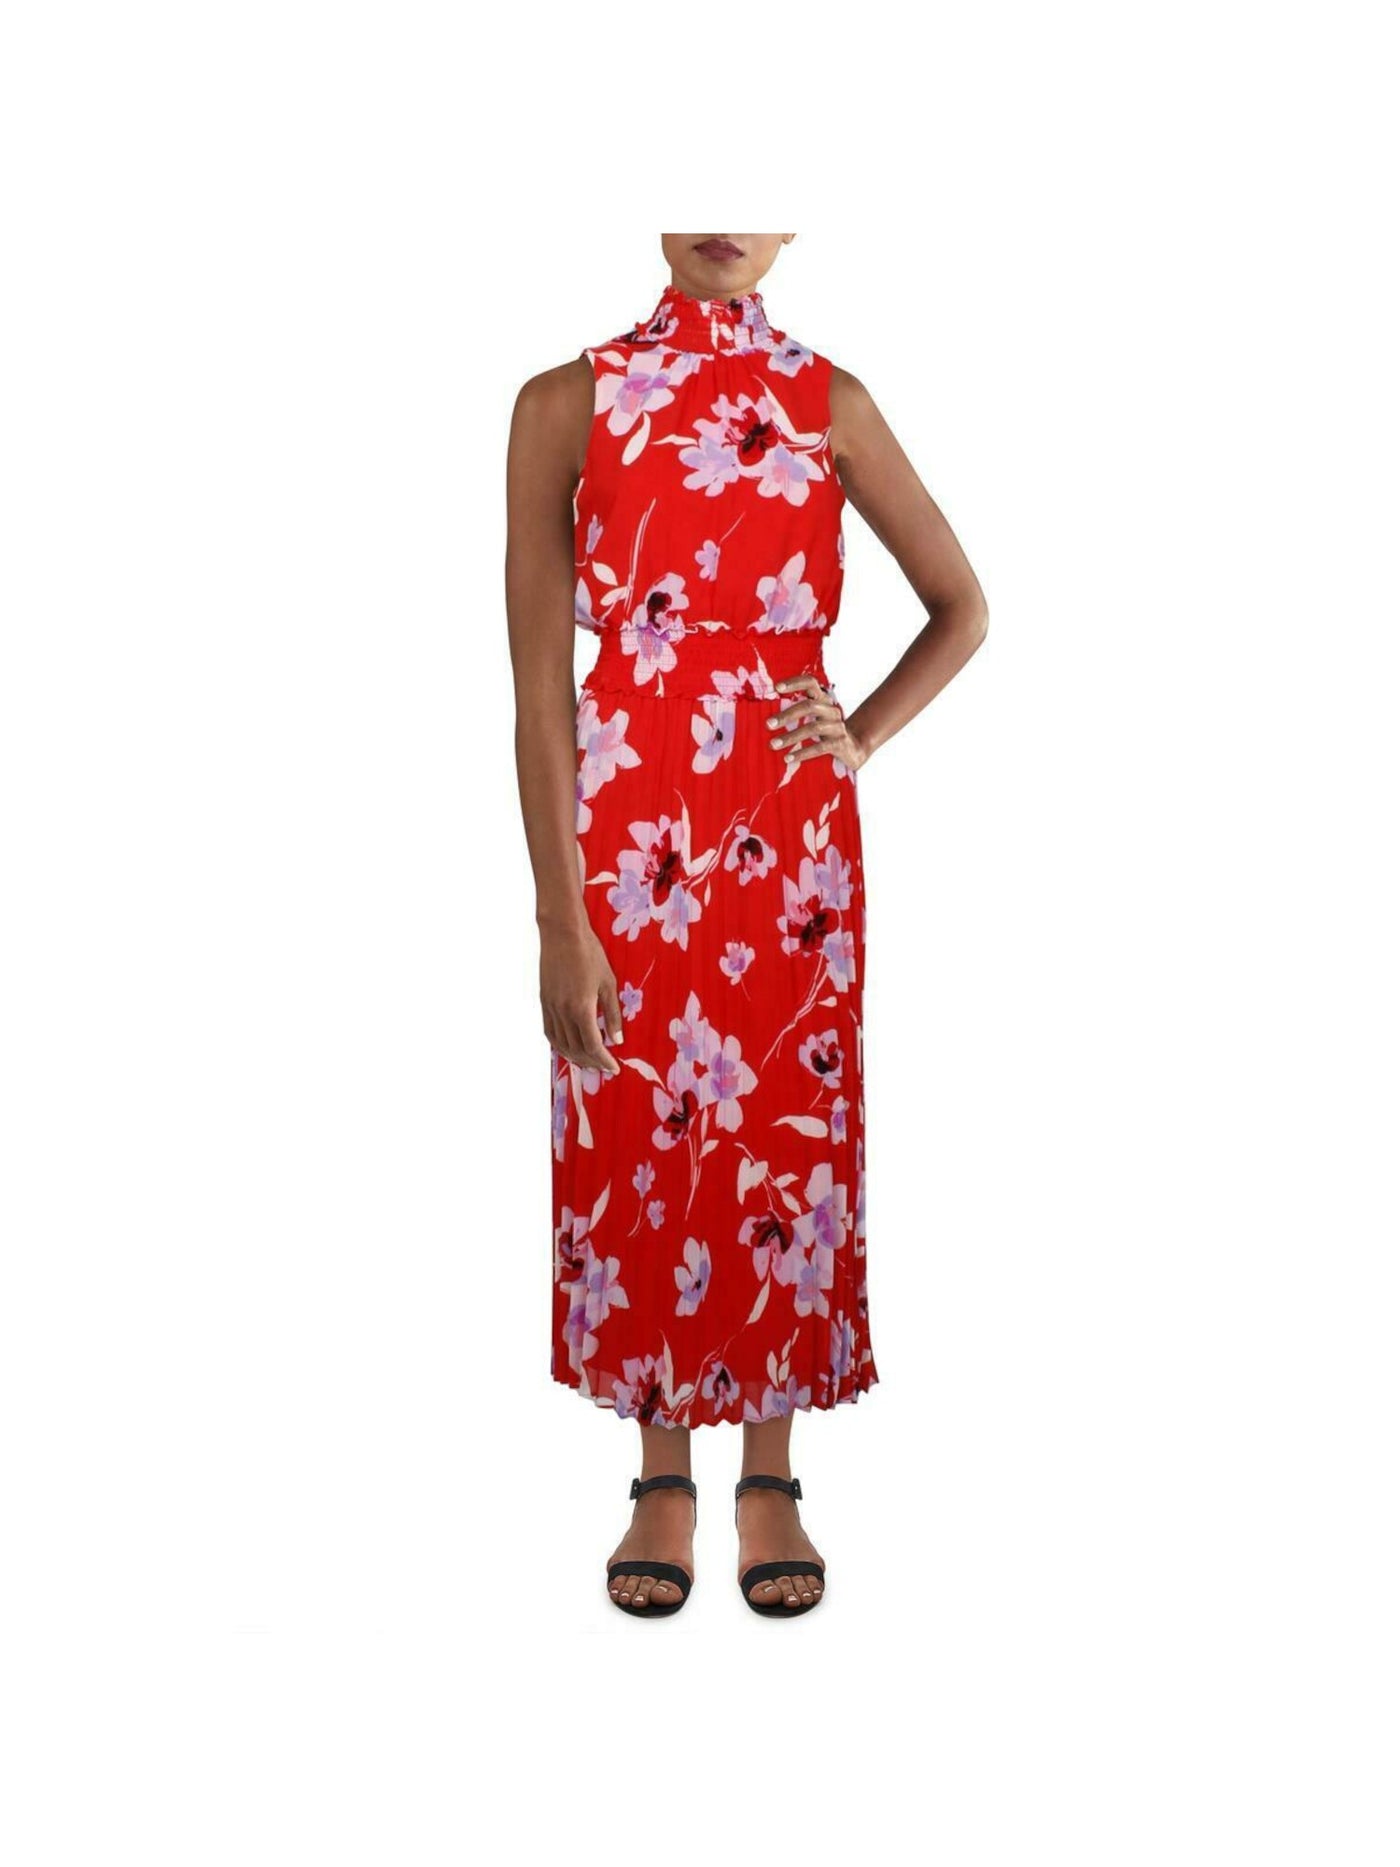 CALVIN KLEIN Womens Red Pleated Smocked Neckline And Waistband Lined Floral Sleeveless Mock Neck Below The Knee Party Fit + Flare Dress S